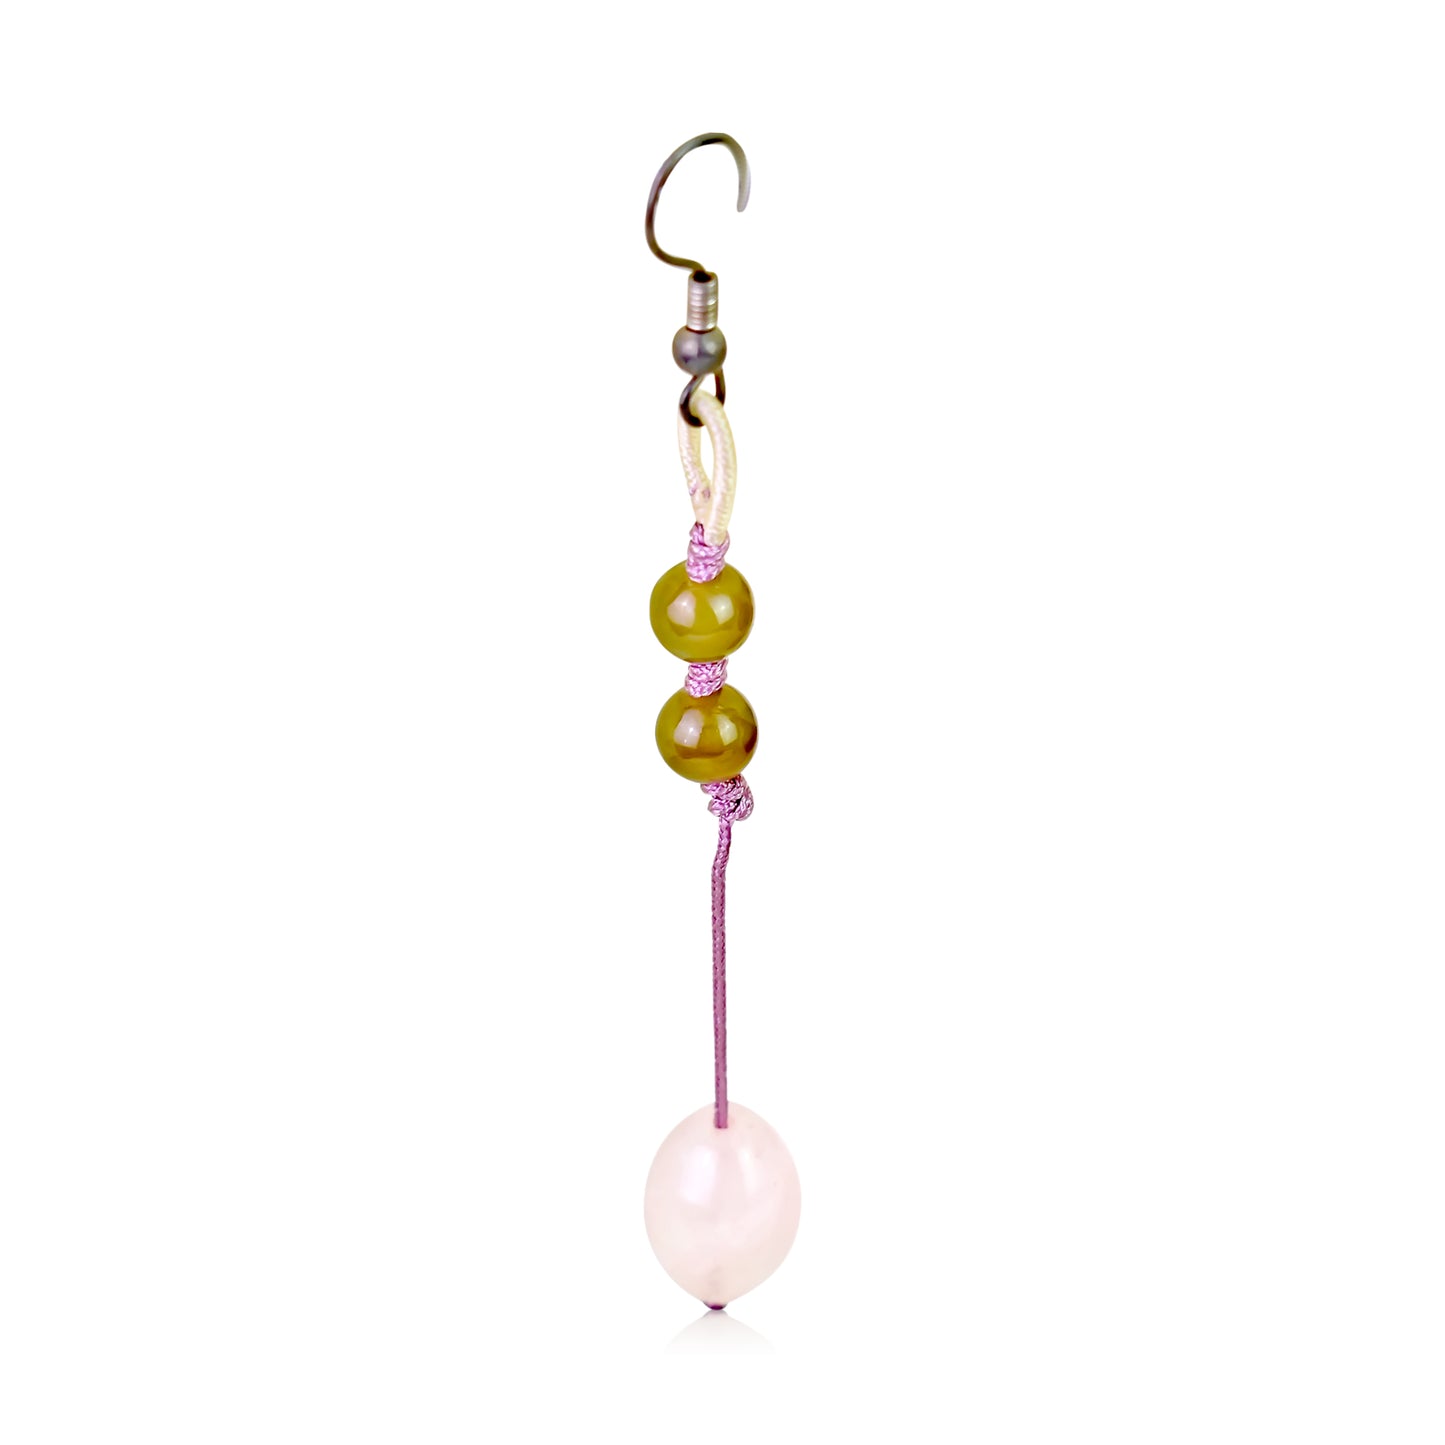 Get Classy with Oblong Rose Quartz Earrings made with Lavender Cord